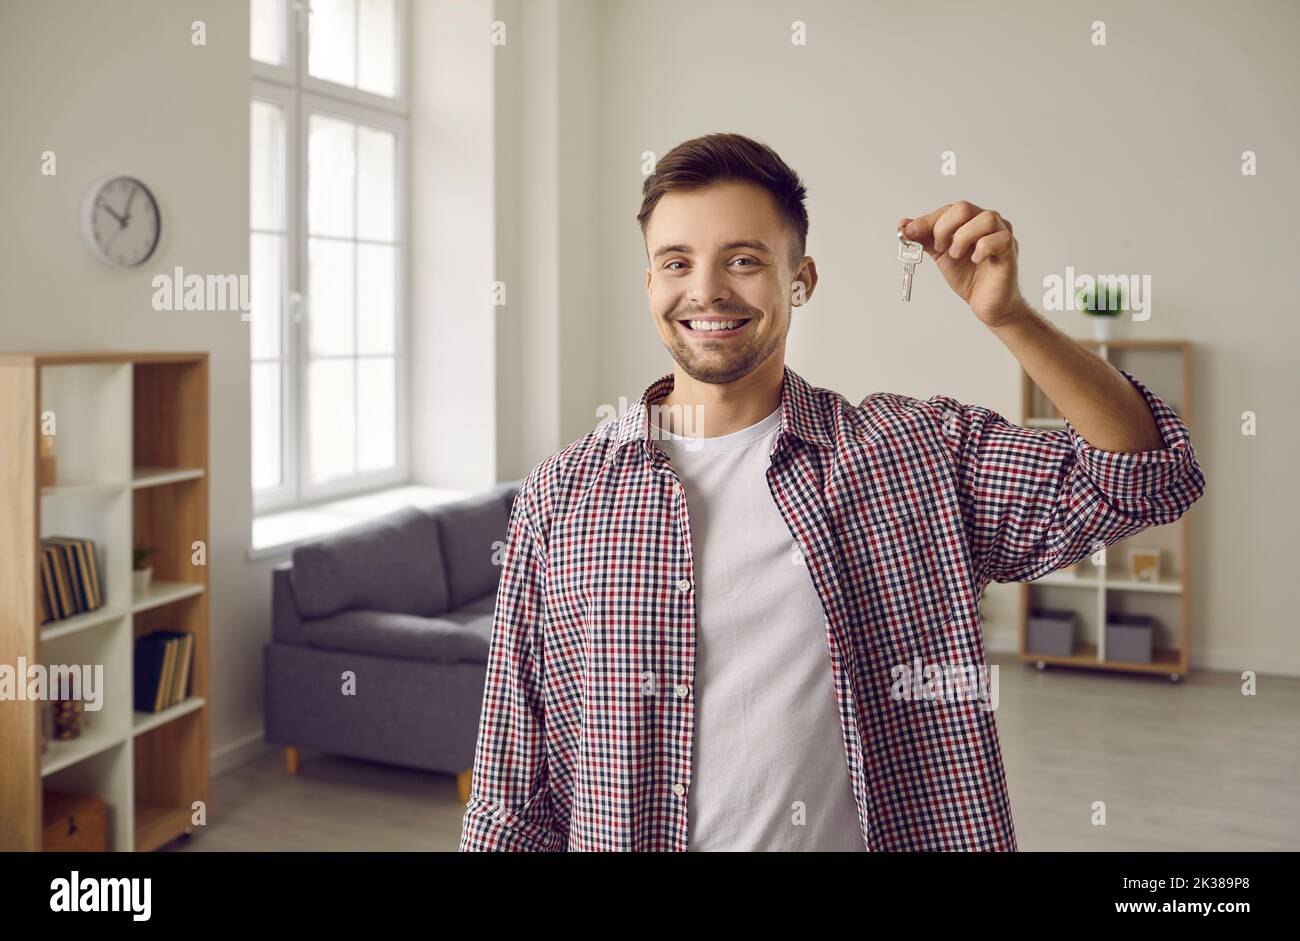 Portrait of a happy young home owner smiling and showing the keys to his new house Stock Photo